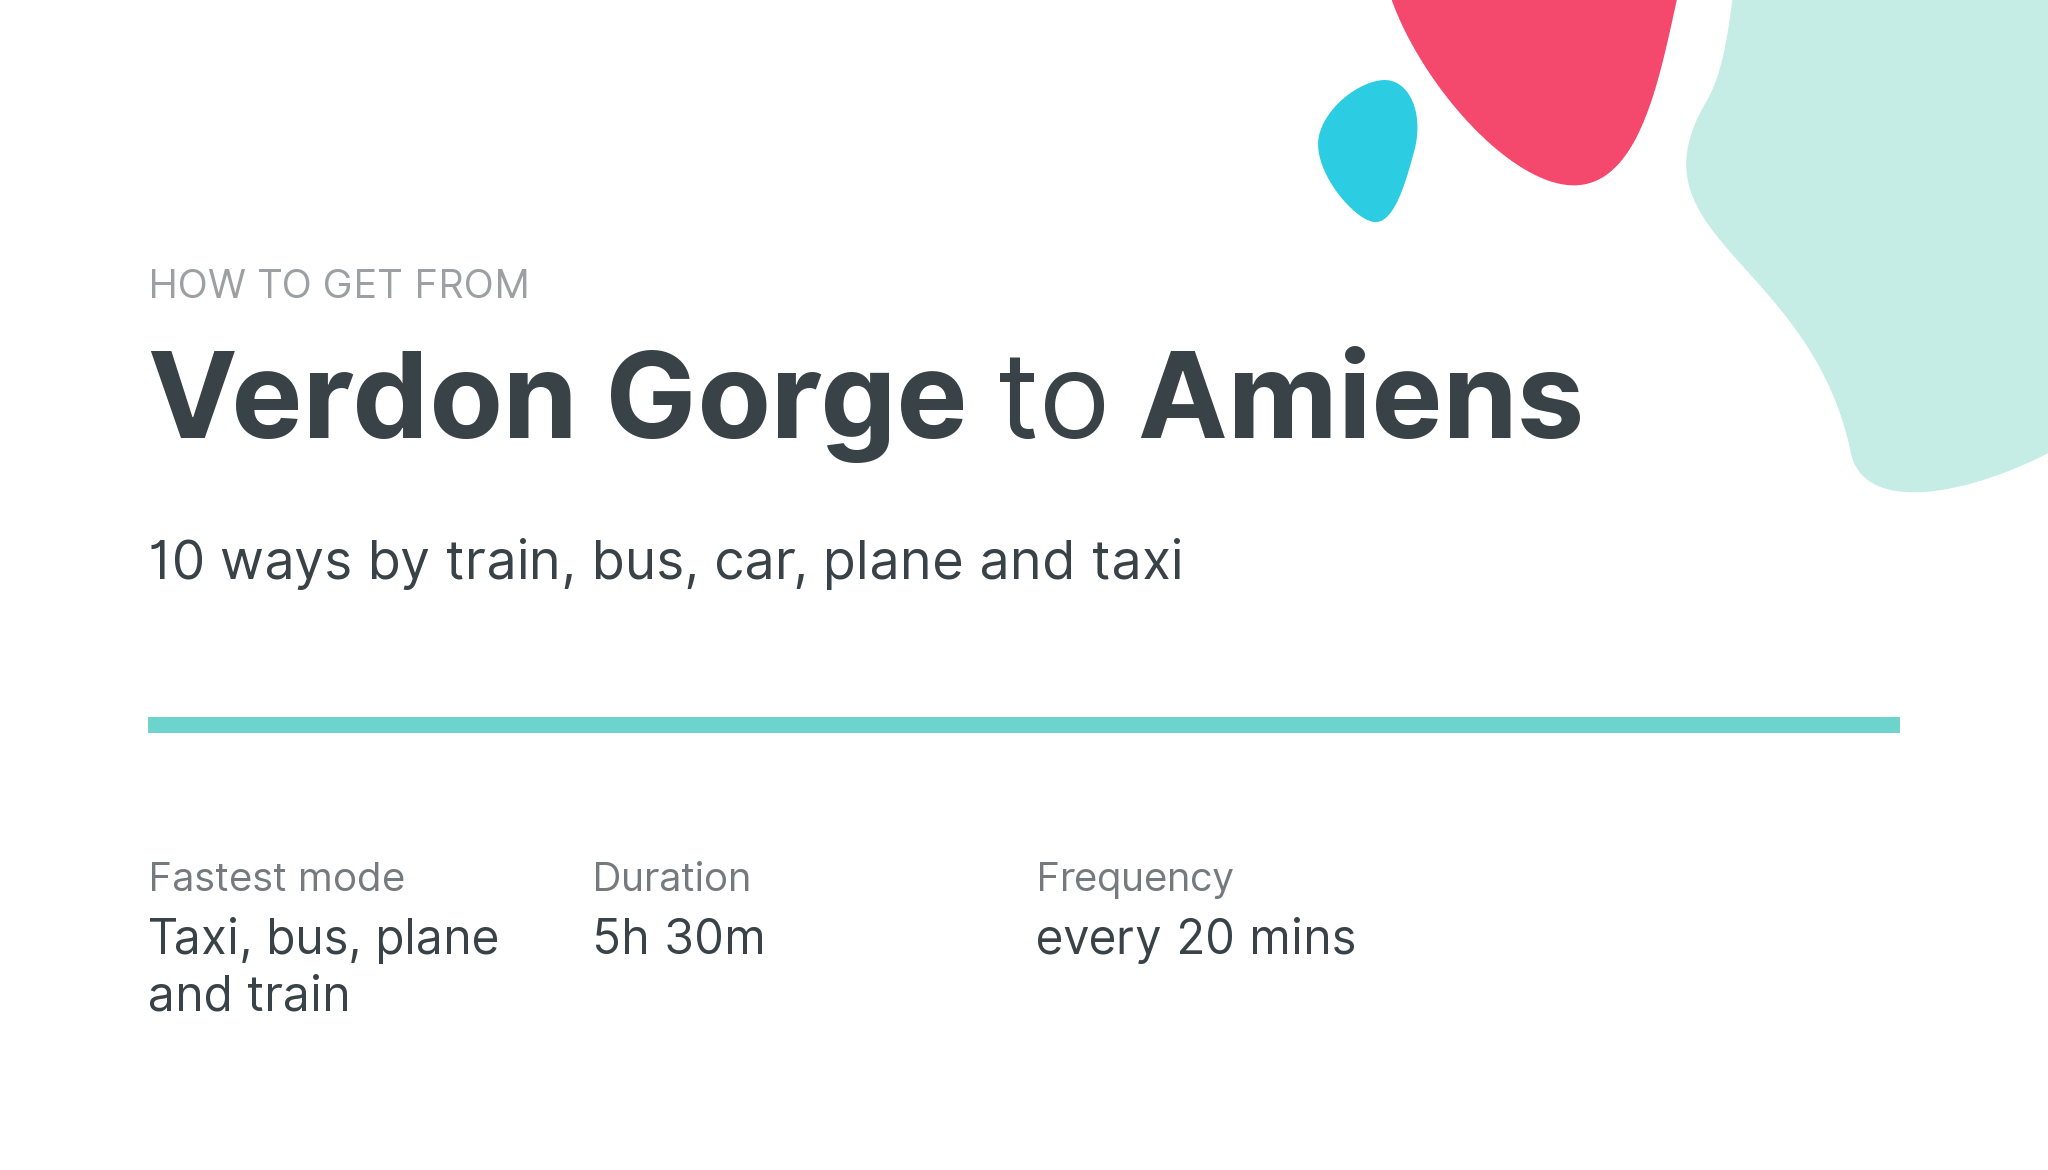 How do I get from Verdon Gorge to Amiens